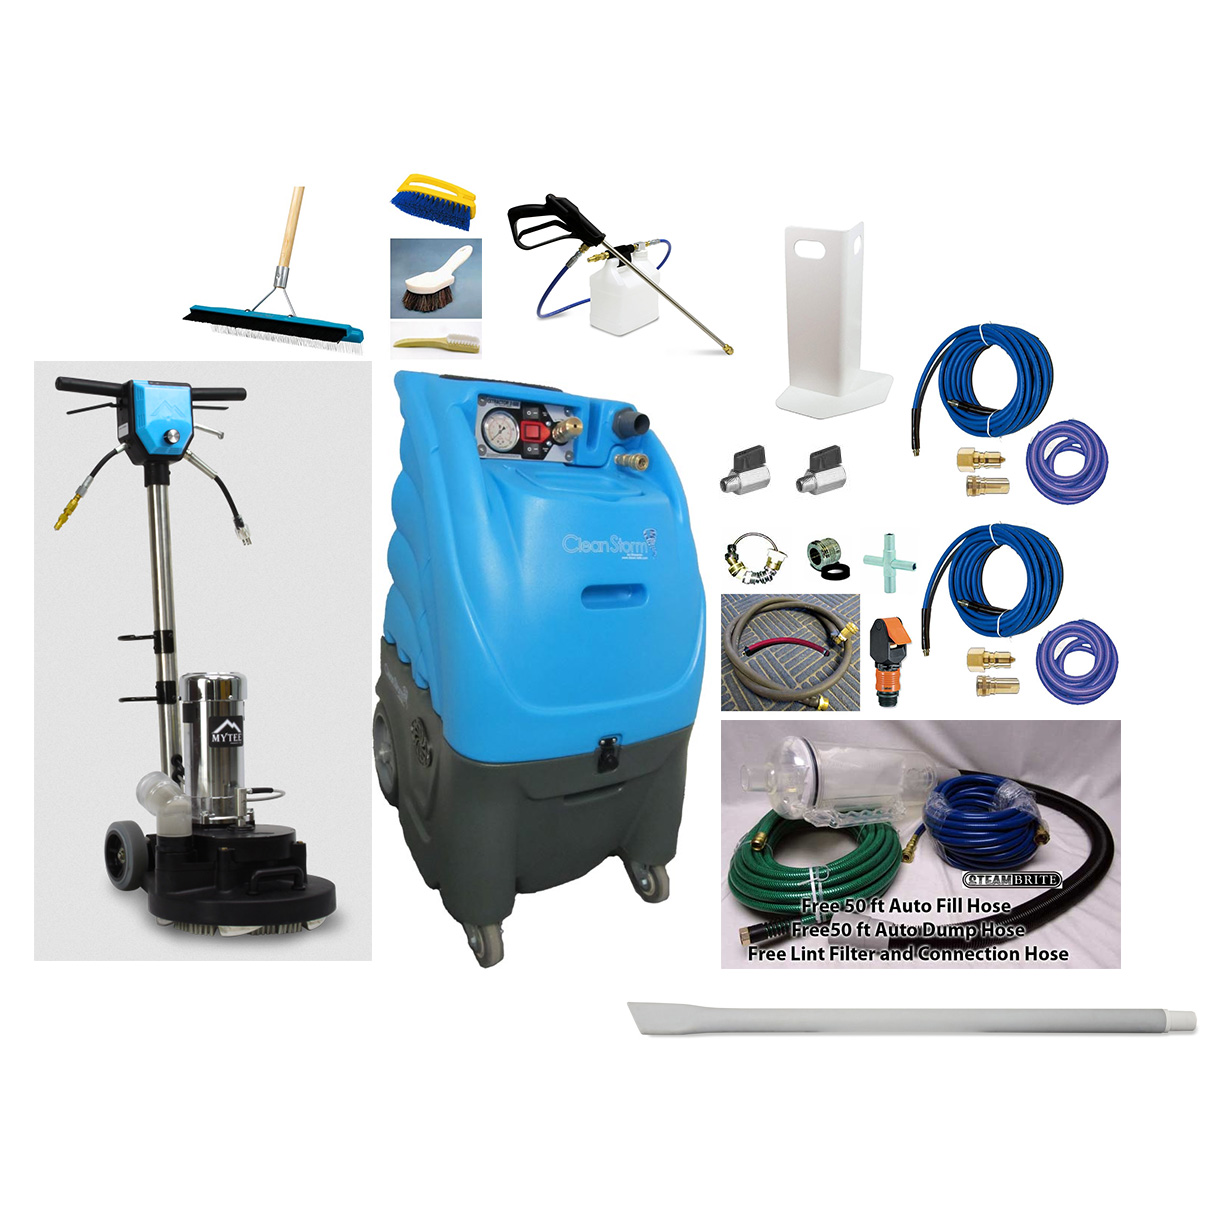 Trex and Clean Storm 12gal 500psi Dual 6.6 Vac Auto Fill 20gpm Auto Dump Starter Package 12-6500-AFAD 20220715